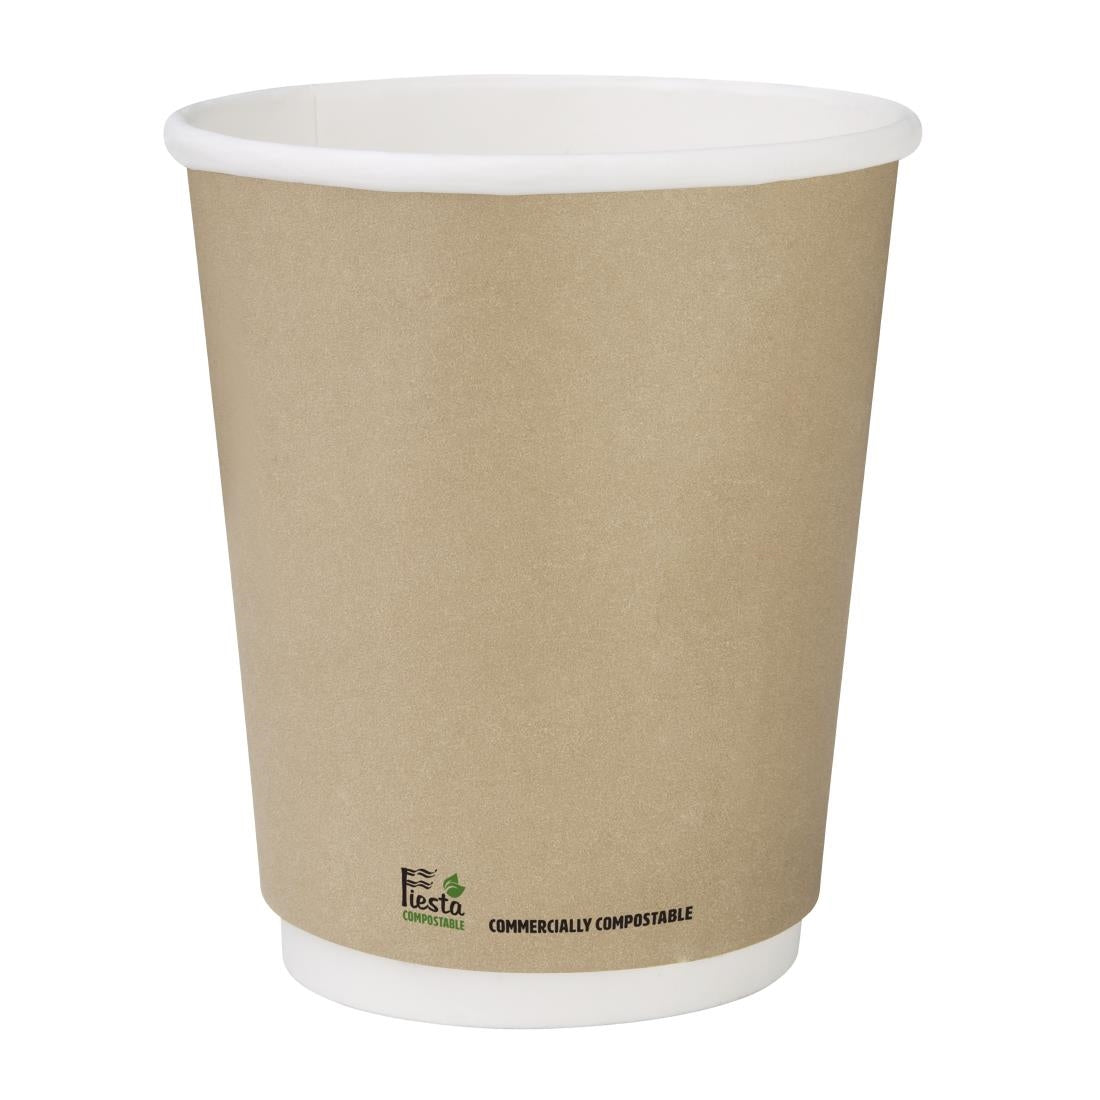 CU984 Fiesta Compostable Coffee Cups Double Wall 227ml / 8oz (Pack of 500)